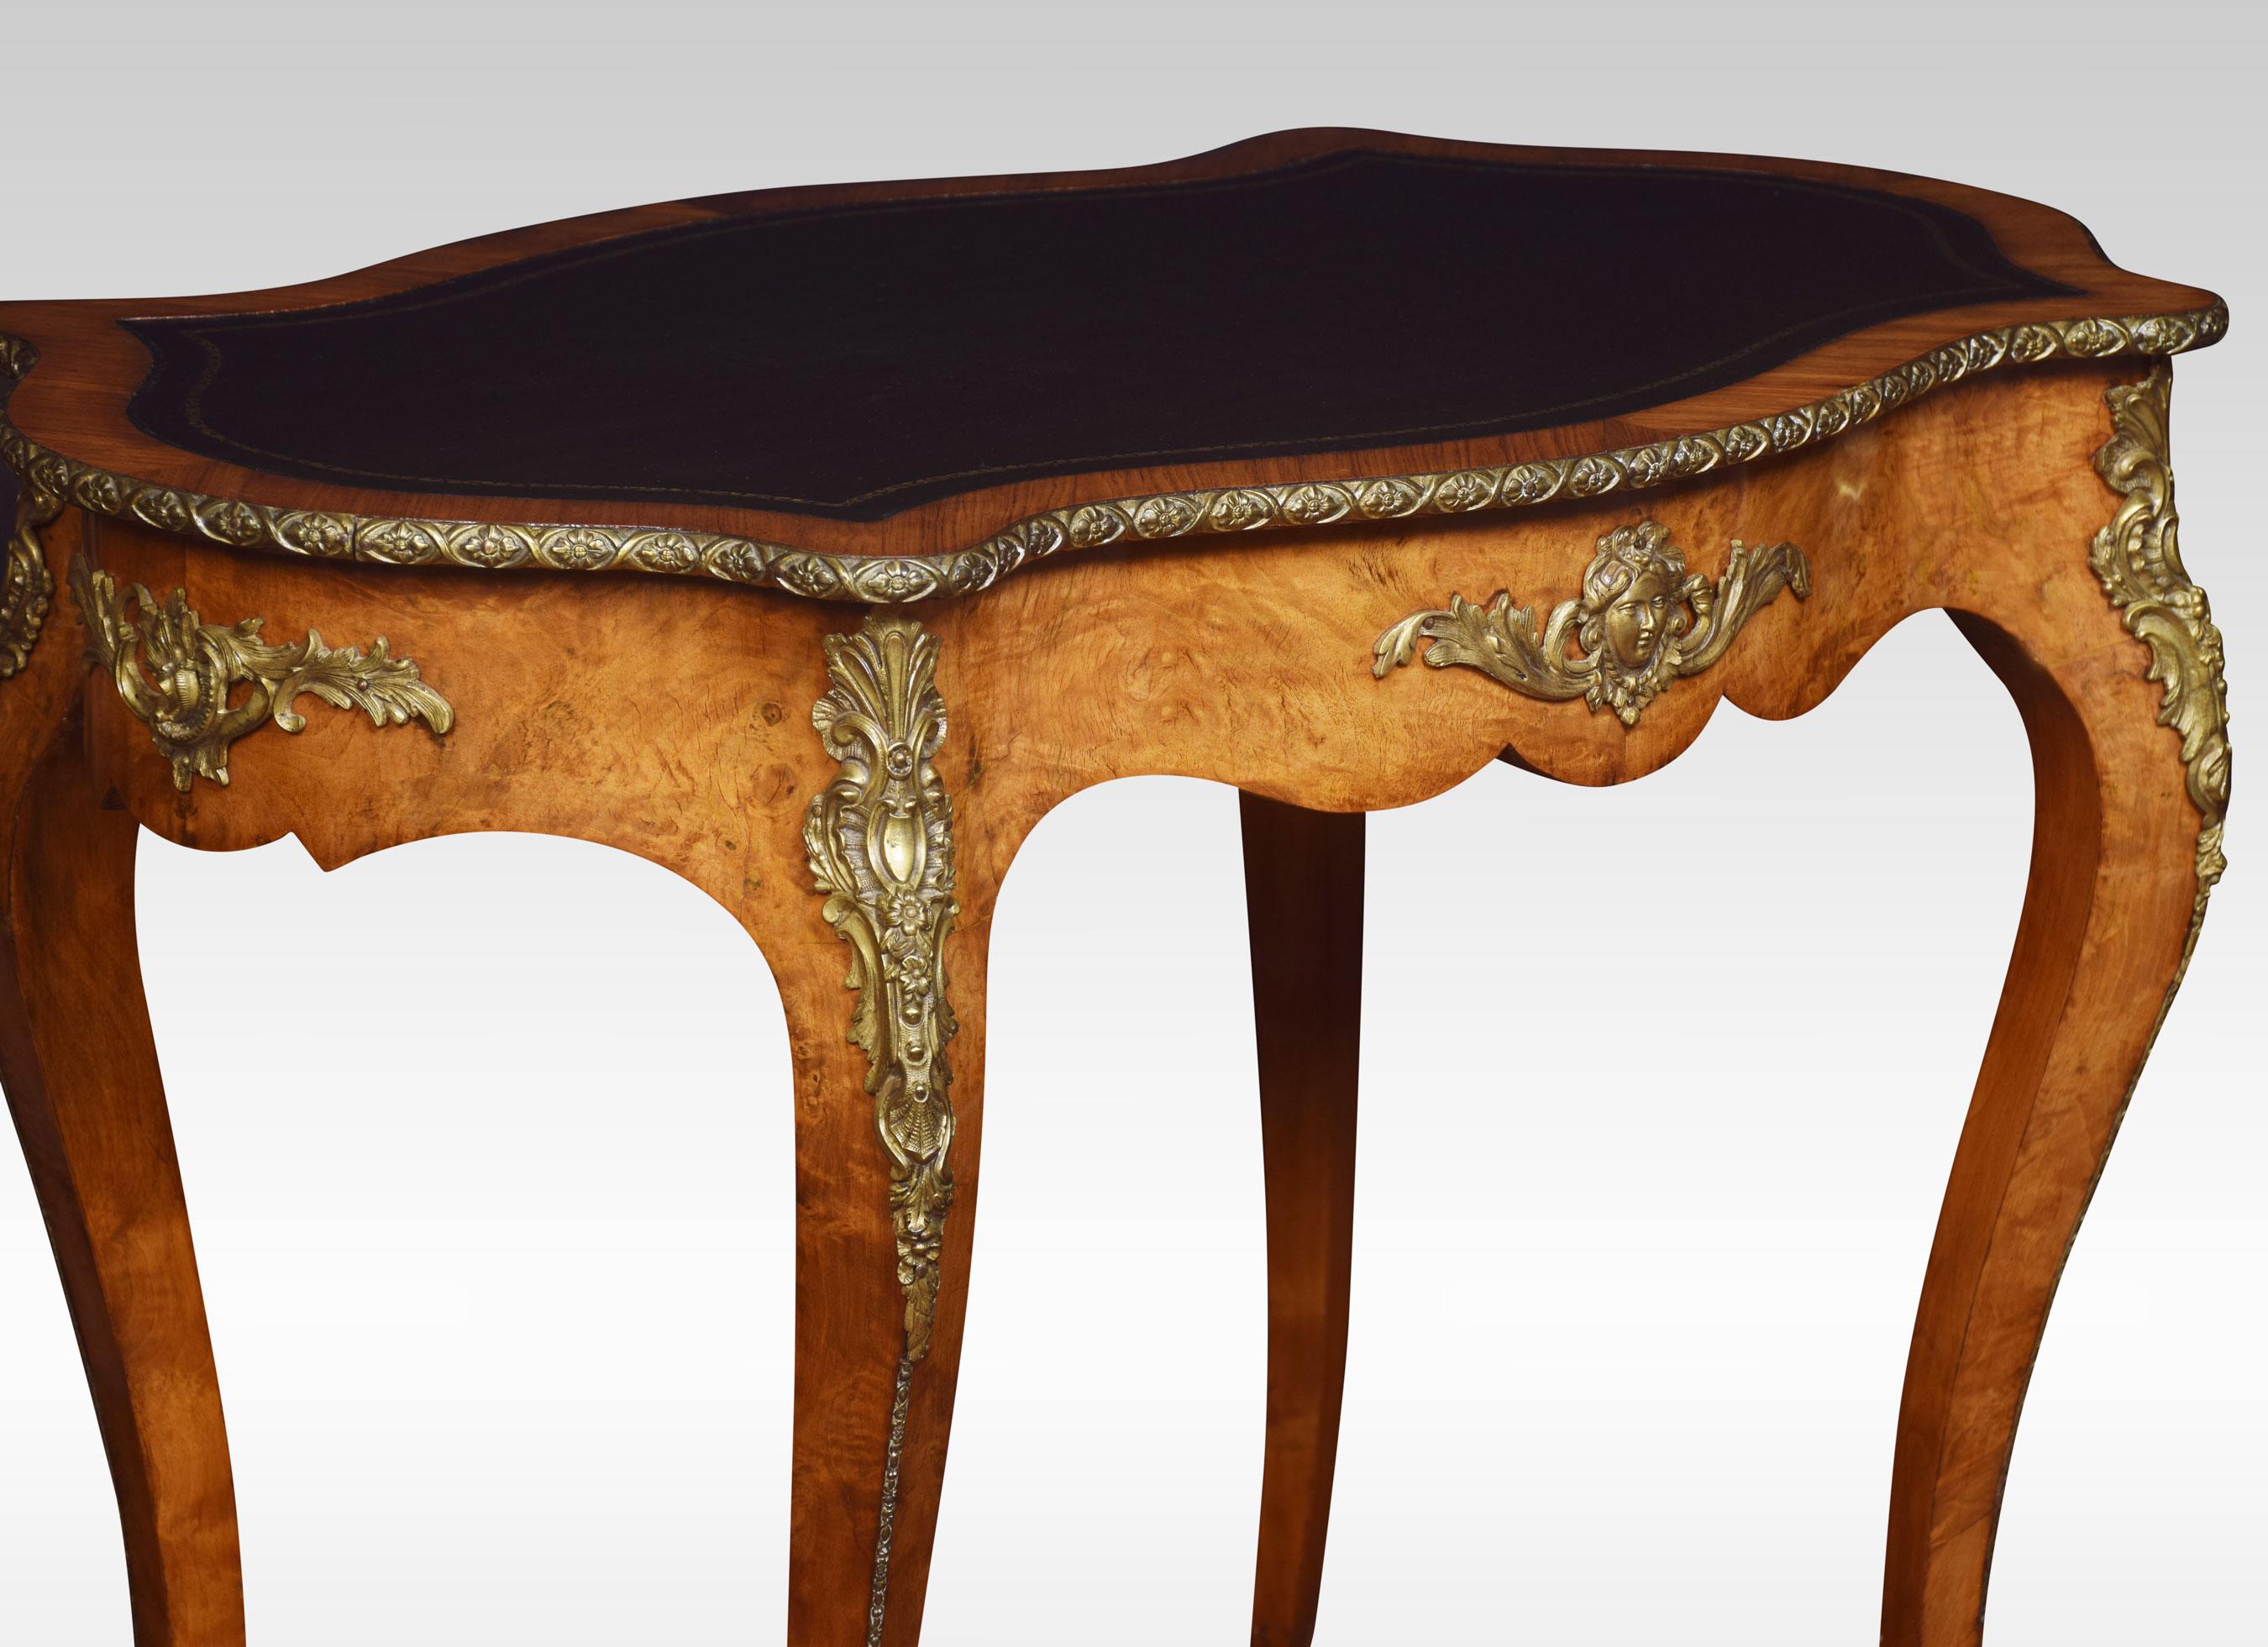 19th century walnut writing table the shaped top with inset leather enclosed by a walnut banding. To the frieze fitted with gilt metal decoration. All raised up on four slender gilt metal mounted cabrioles supports.
Dimensions
Height 29